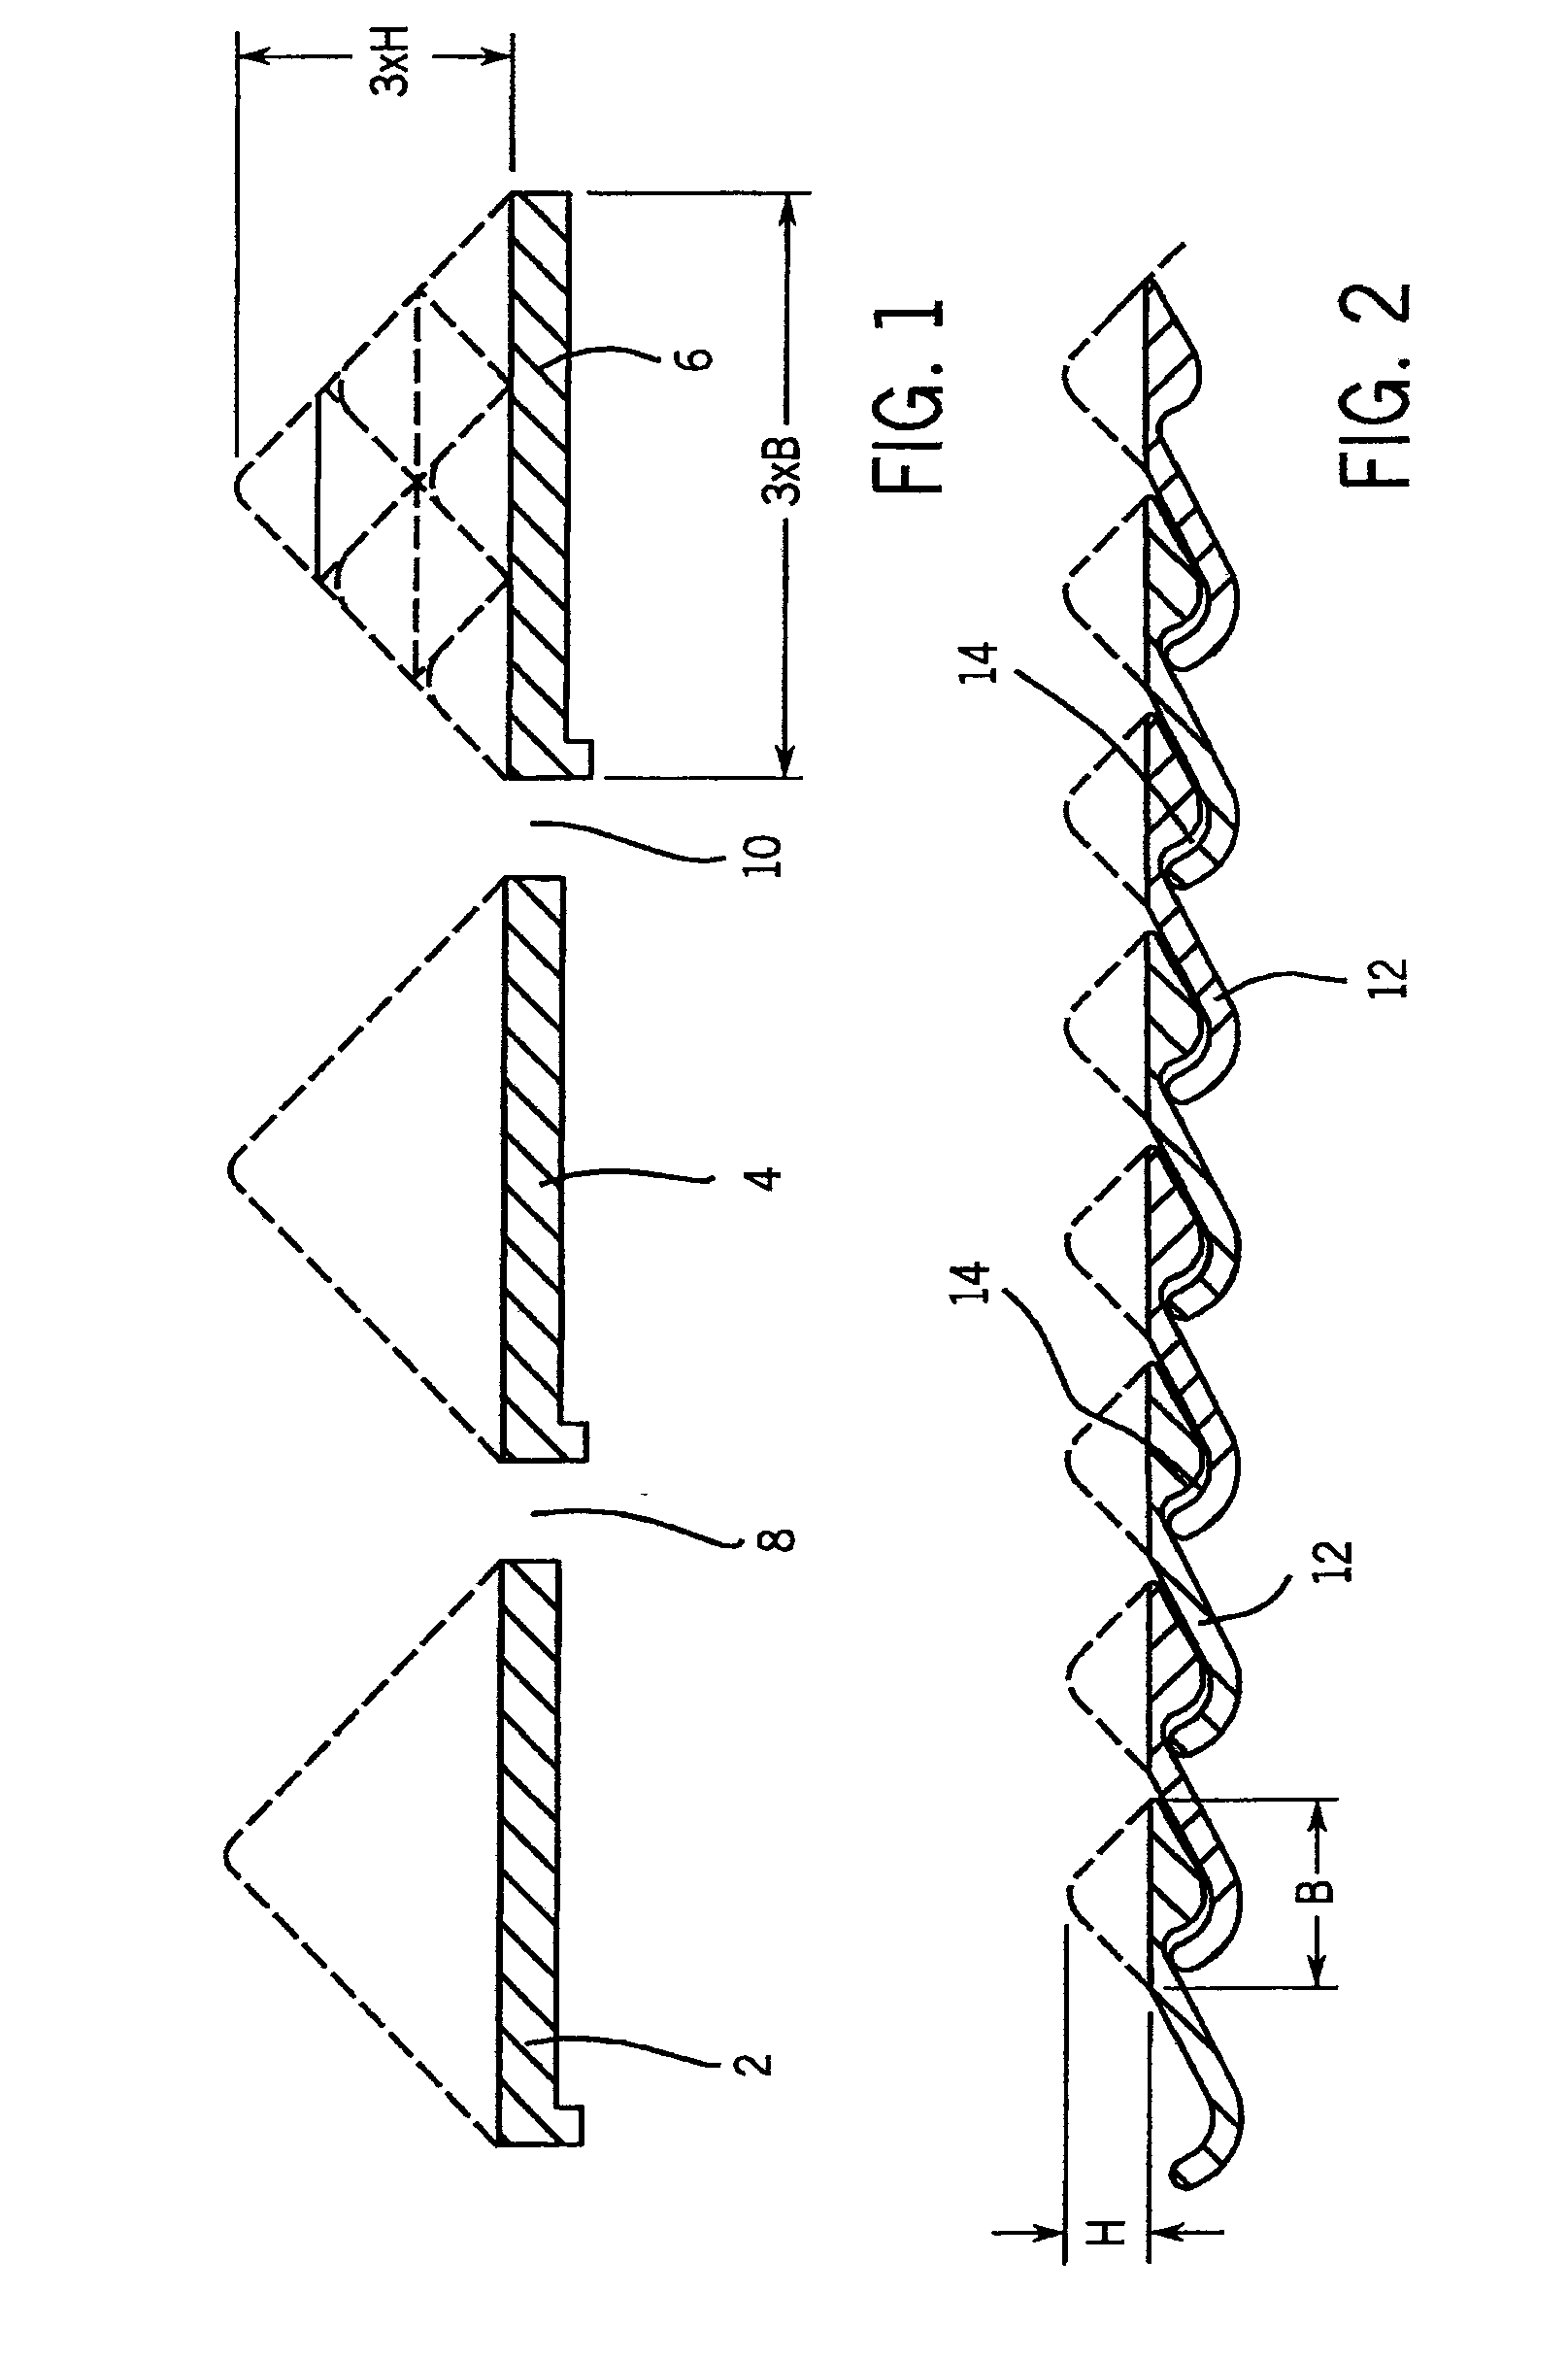 Method And Device For Cooling A Layer of Bulk Material On a Conveyor Grate